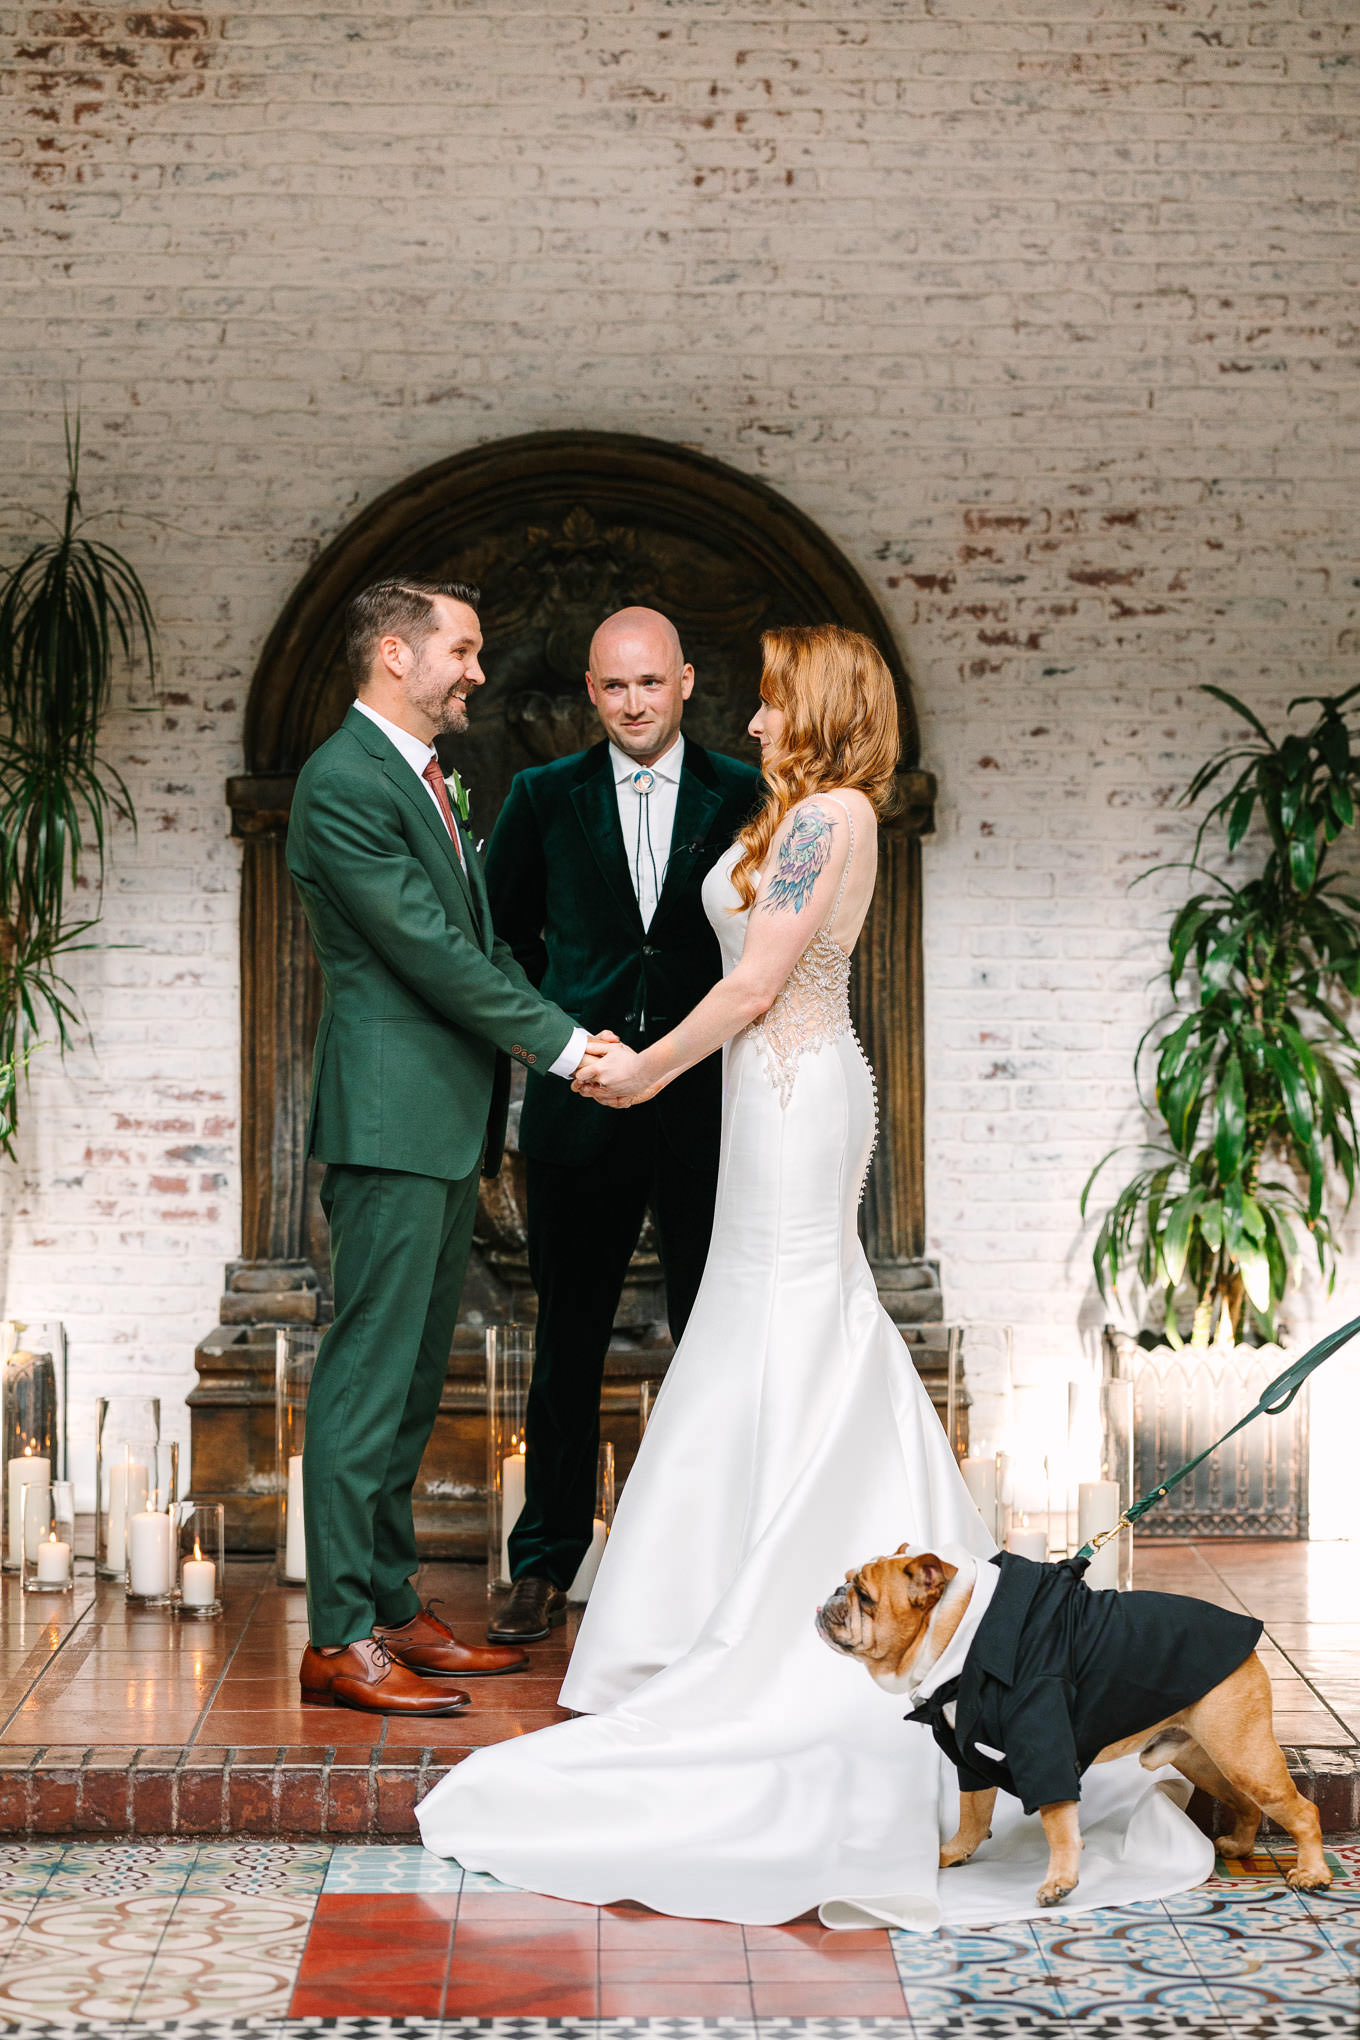 Ebell Long Beach Wedding | Wedding and elopement photography roundup | Los Angeles and Palm Springs  photographer | #losangeleswedding #palmspringswedding #elopementphotographer

Source: Mary Costa Photography | Los Angeles